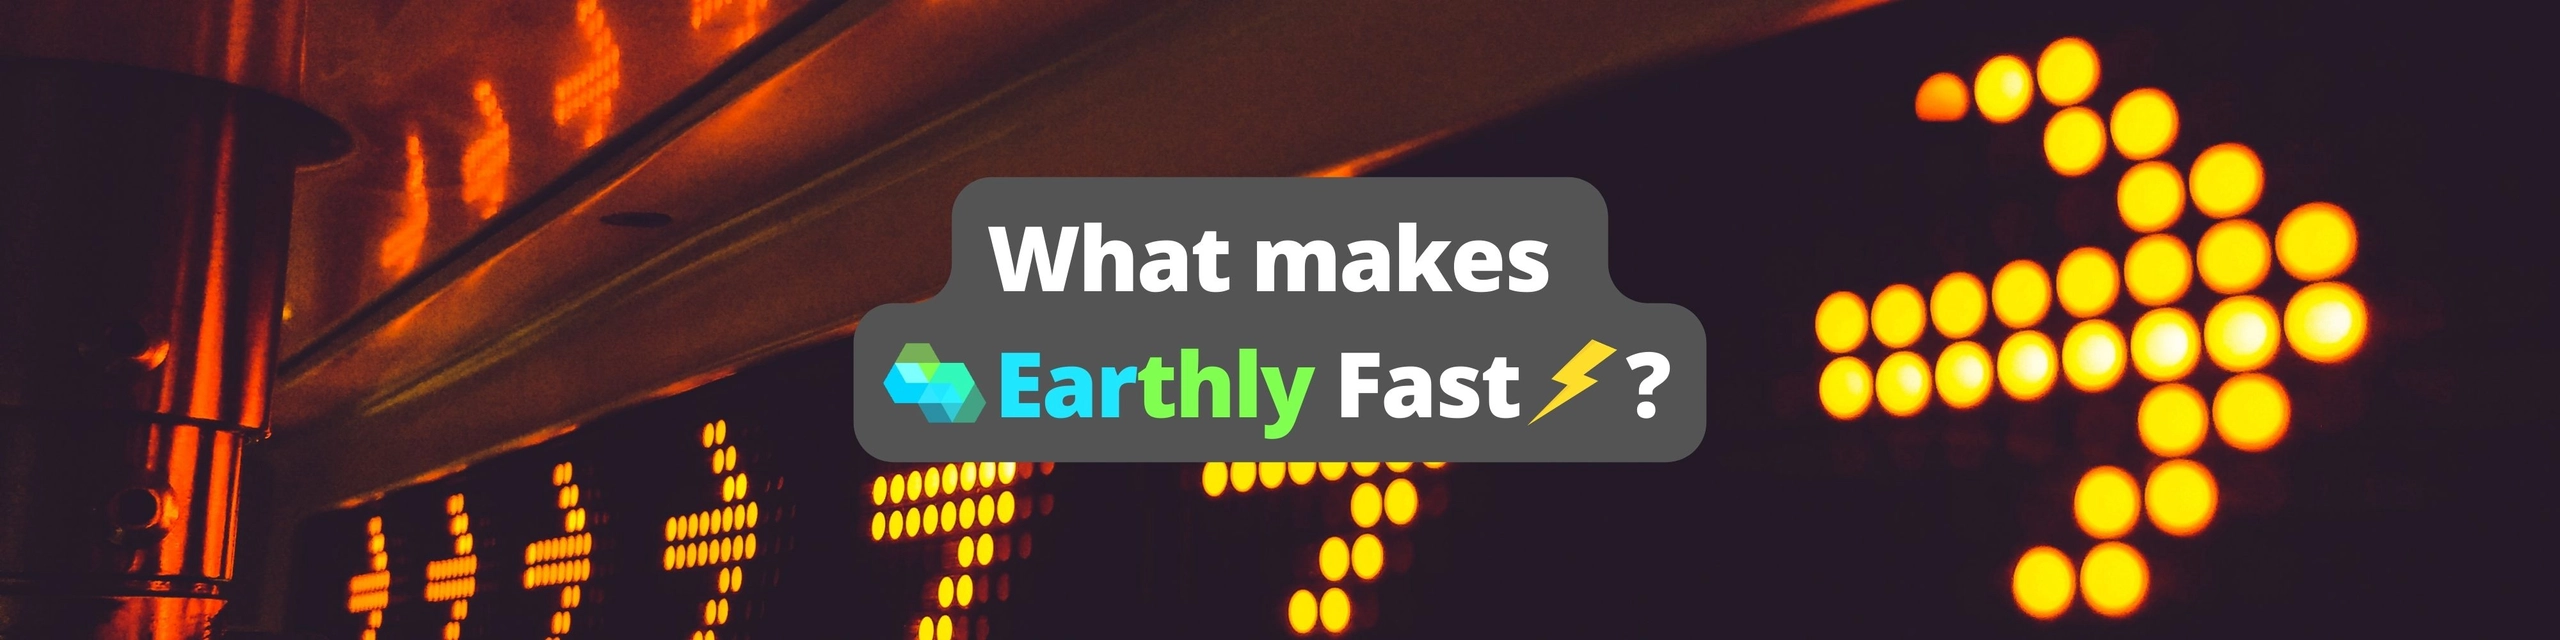 What makes Earthly fast